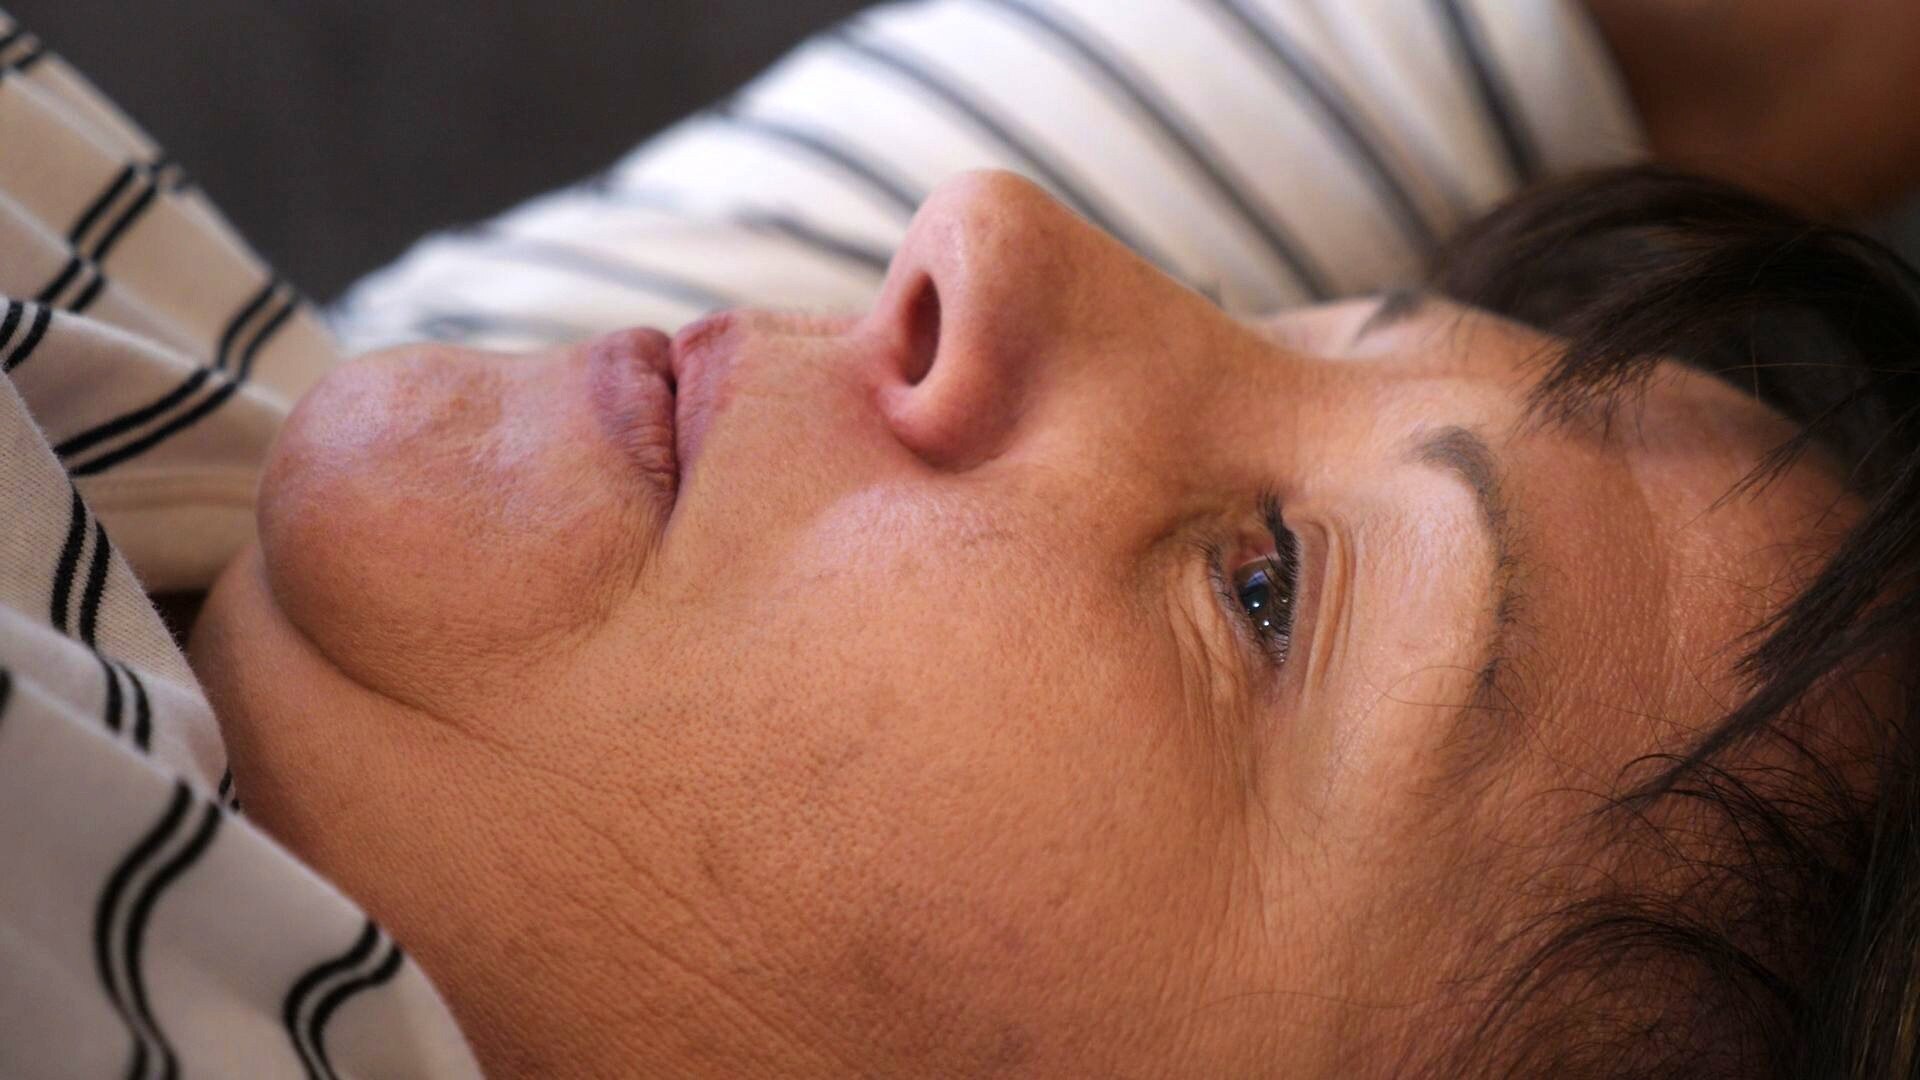 A close-up of a woman's face as she's breathing while lying on her back.